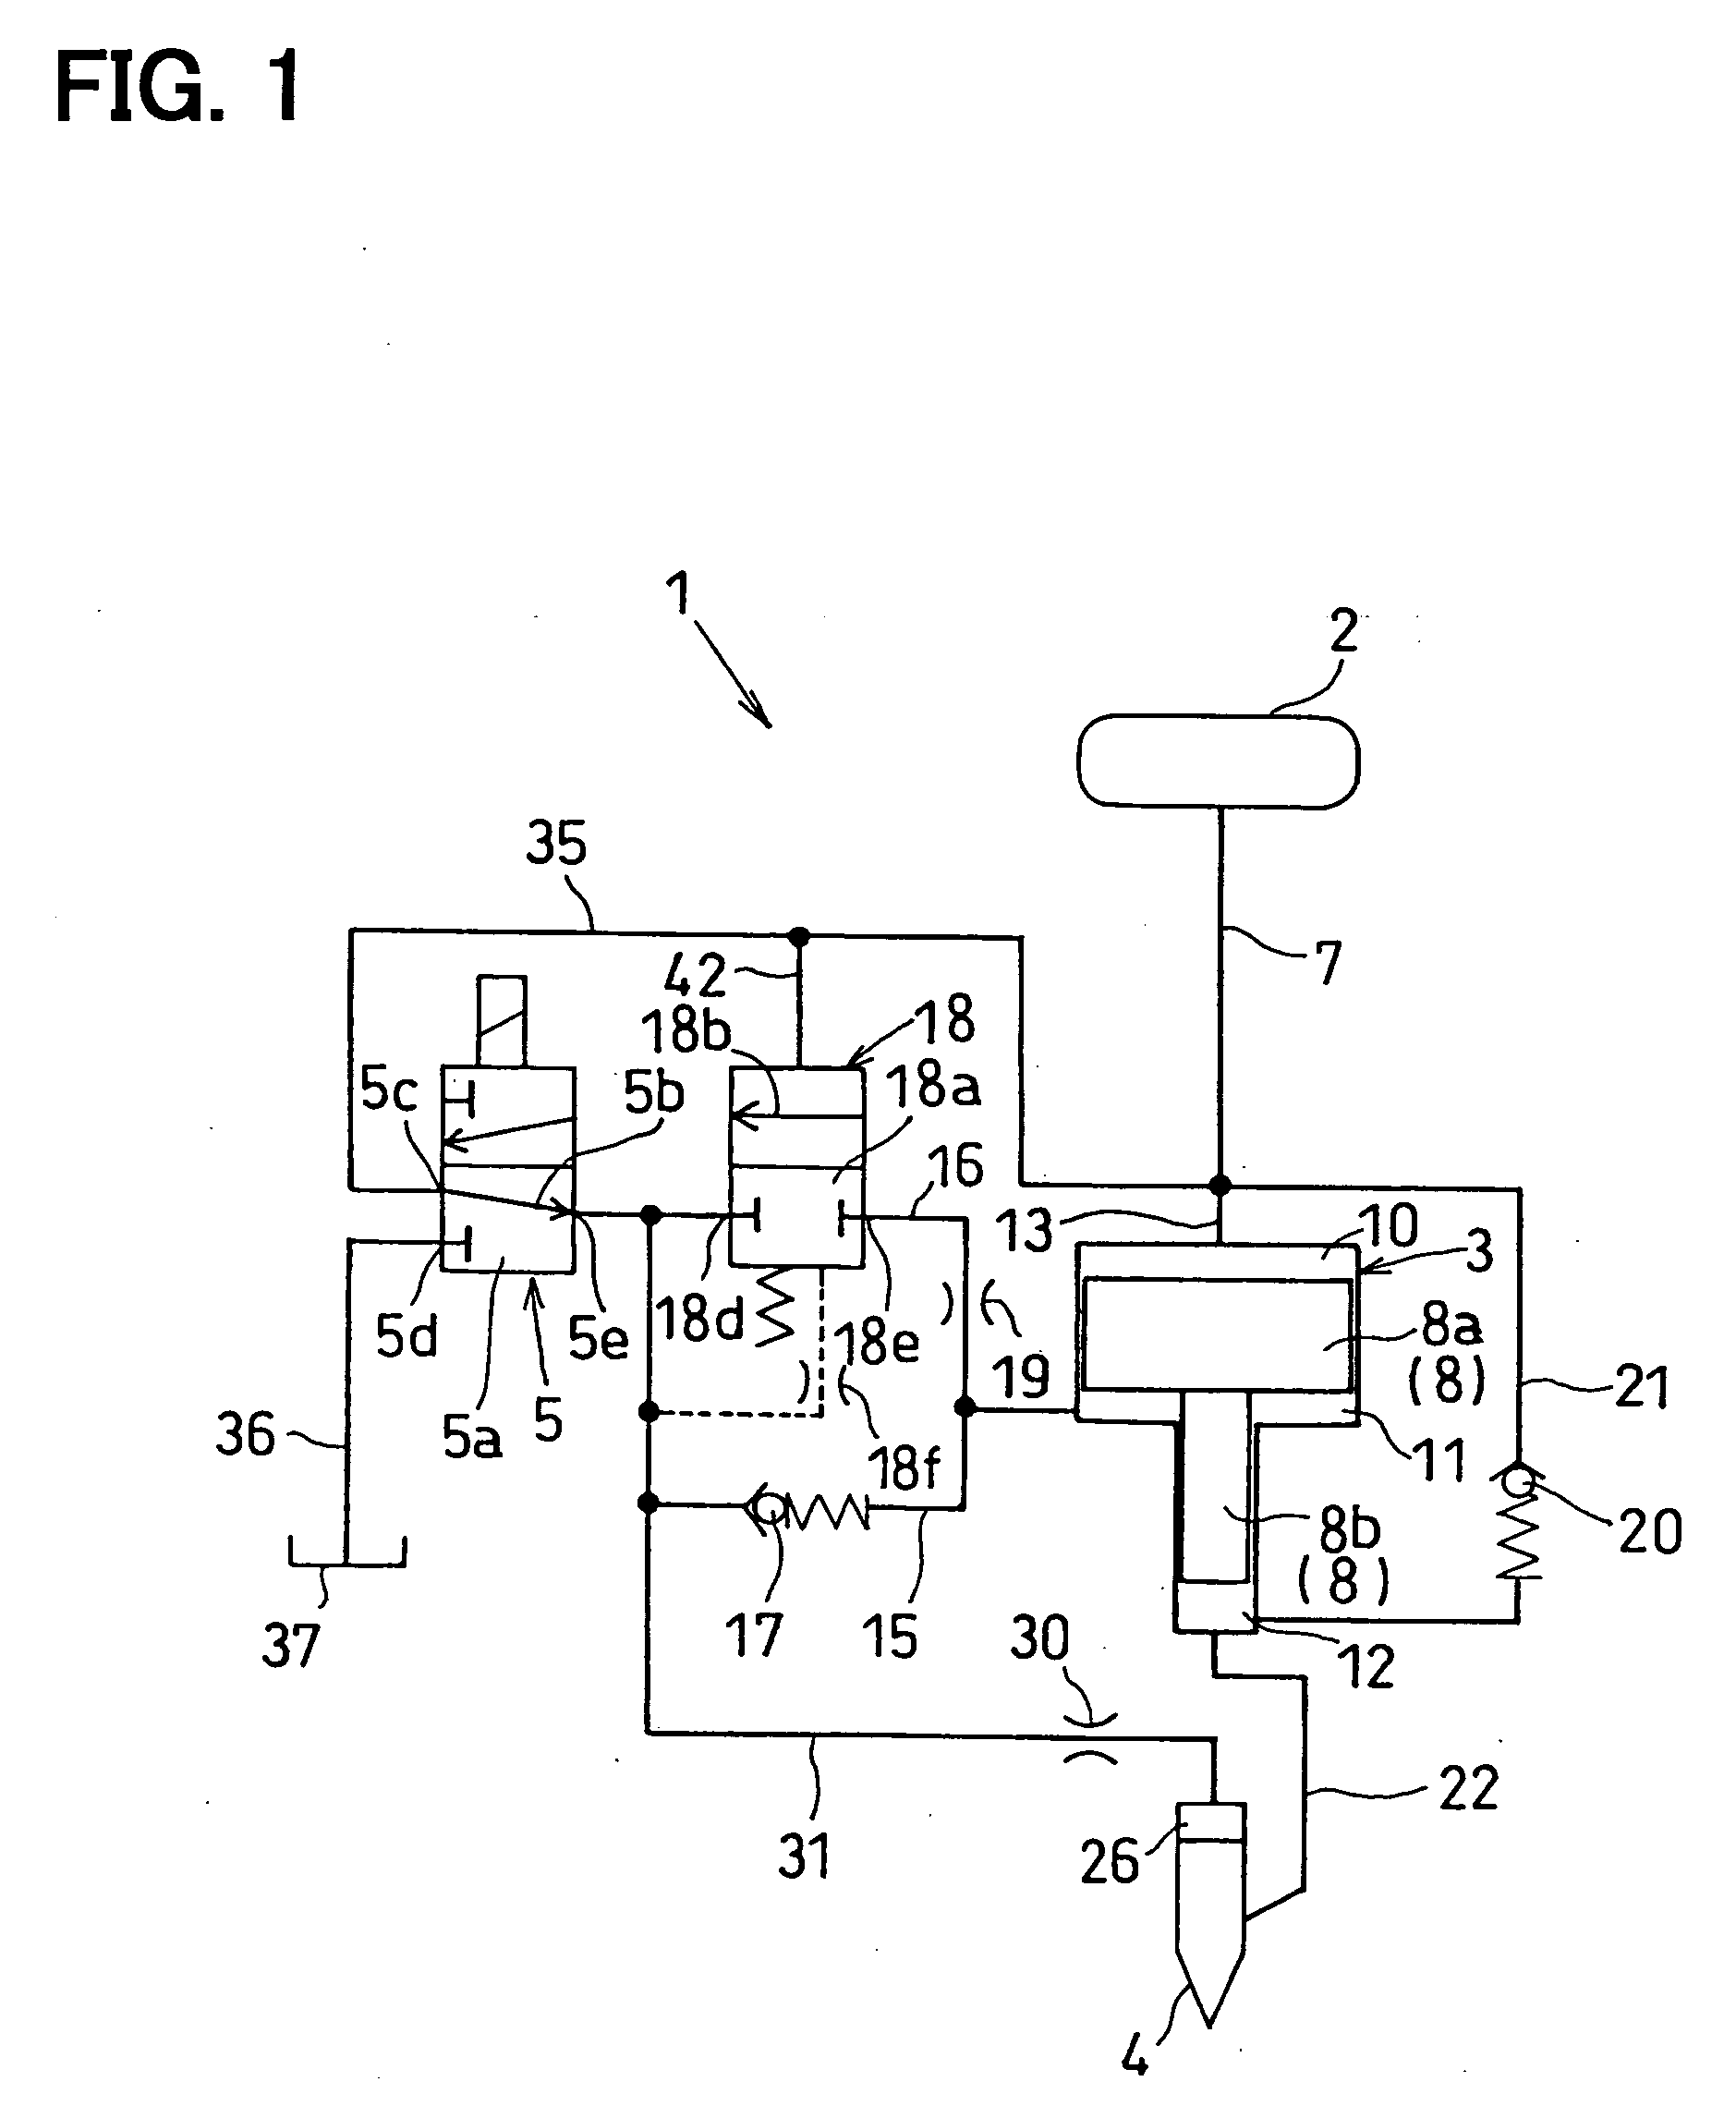 Fuel injection system for internal combustion engine